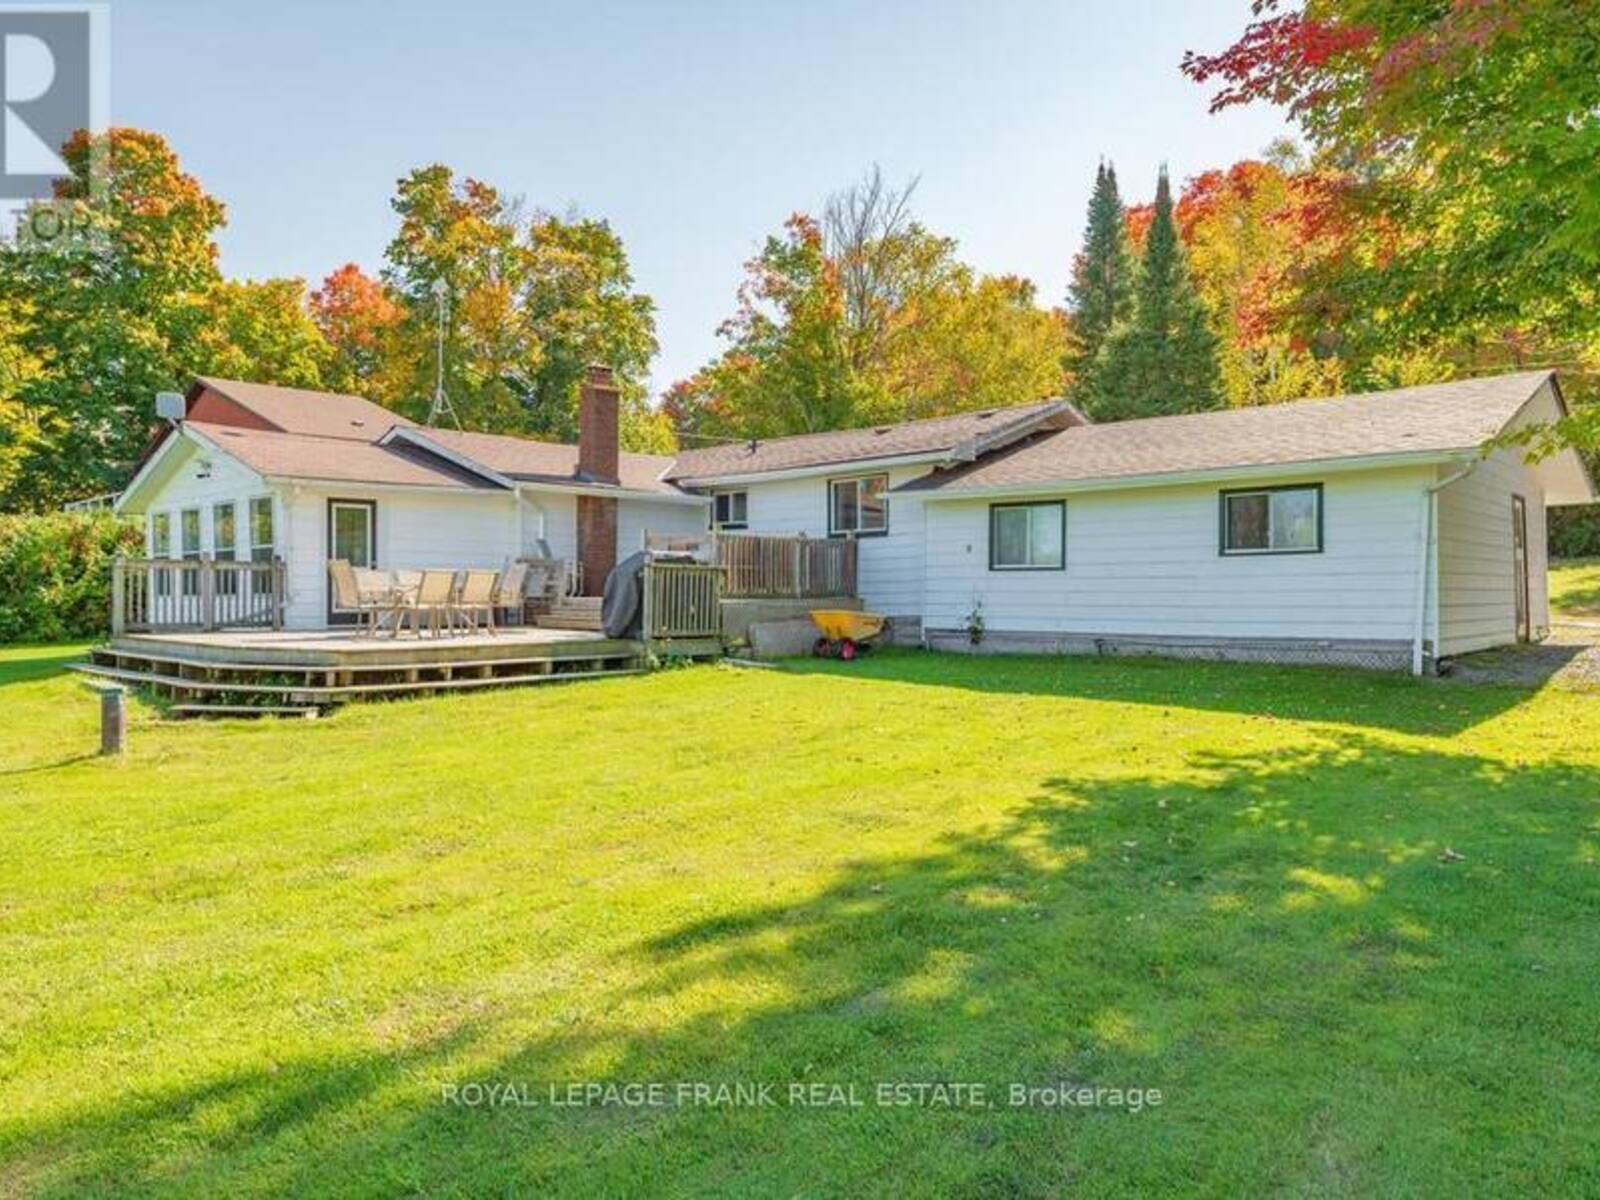 1279 YOUNG'S COVE ROAD, Smith-Ennismore-Lakefield, Ontario K0L 1T0